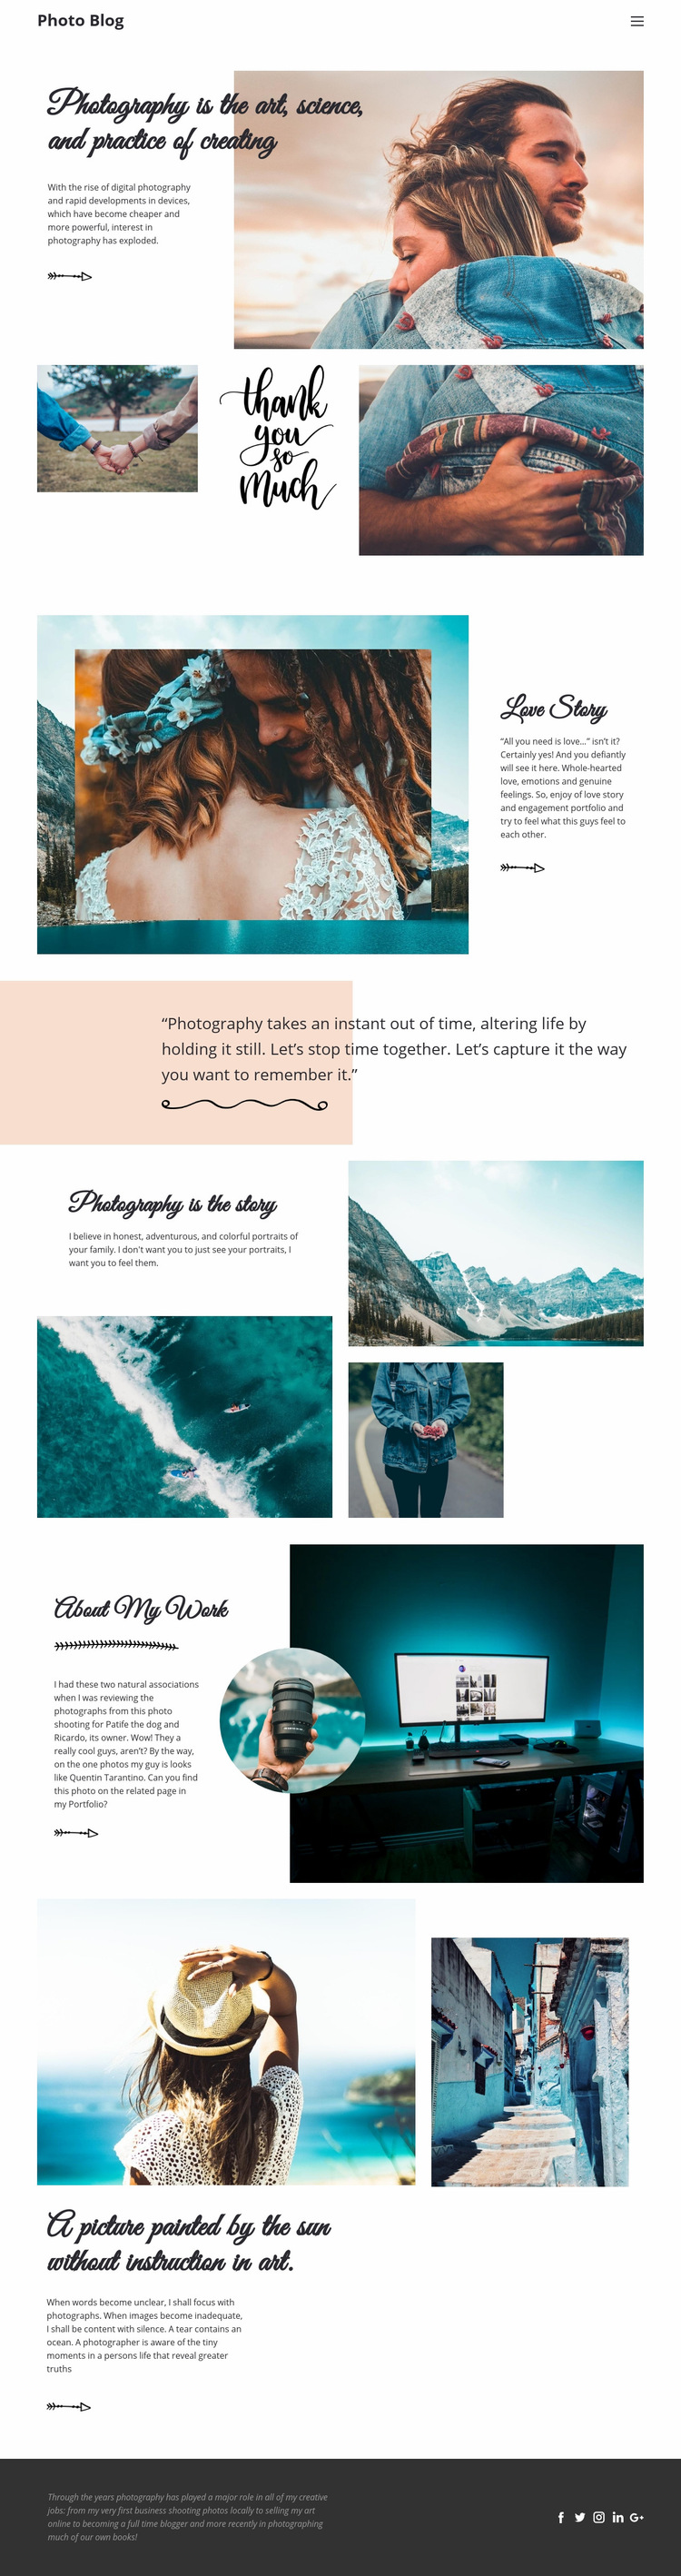 Creative Photography Web Page Design